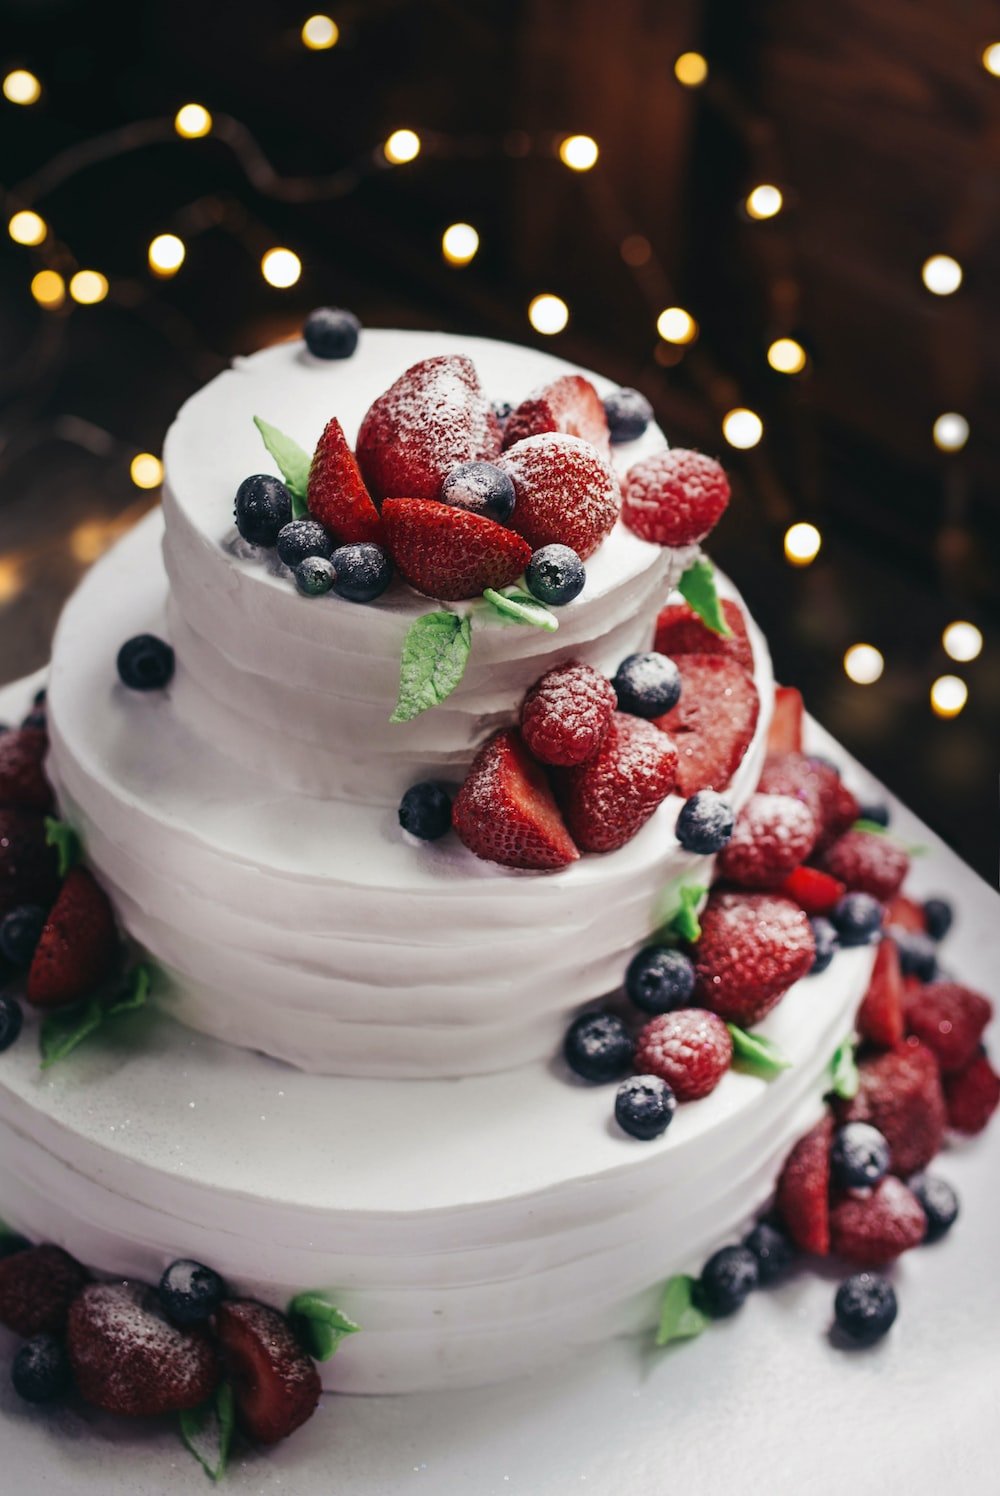 Cake Picture. Download Free Image